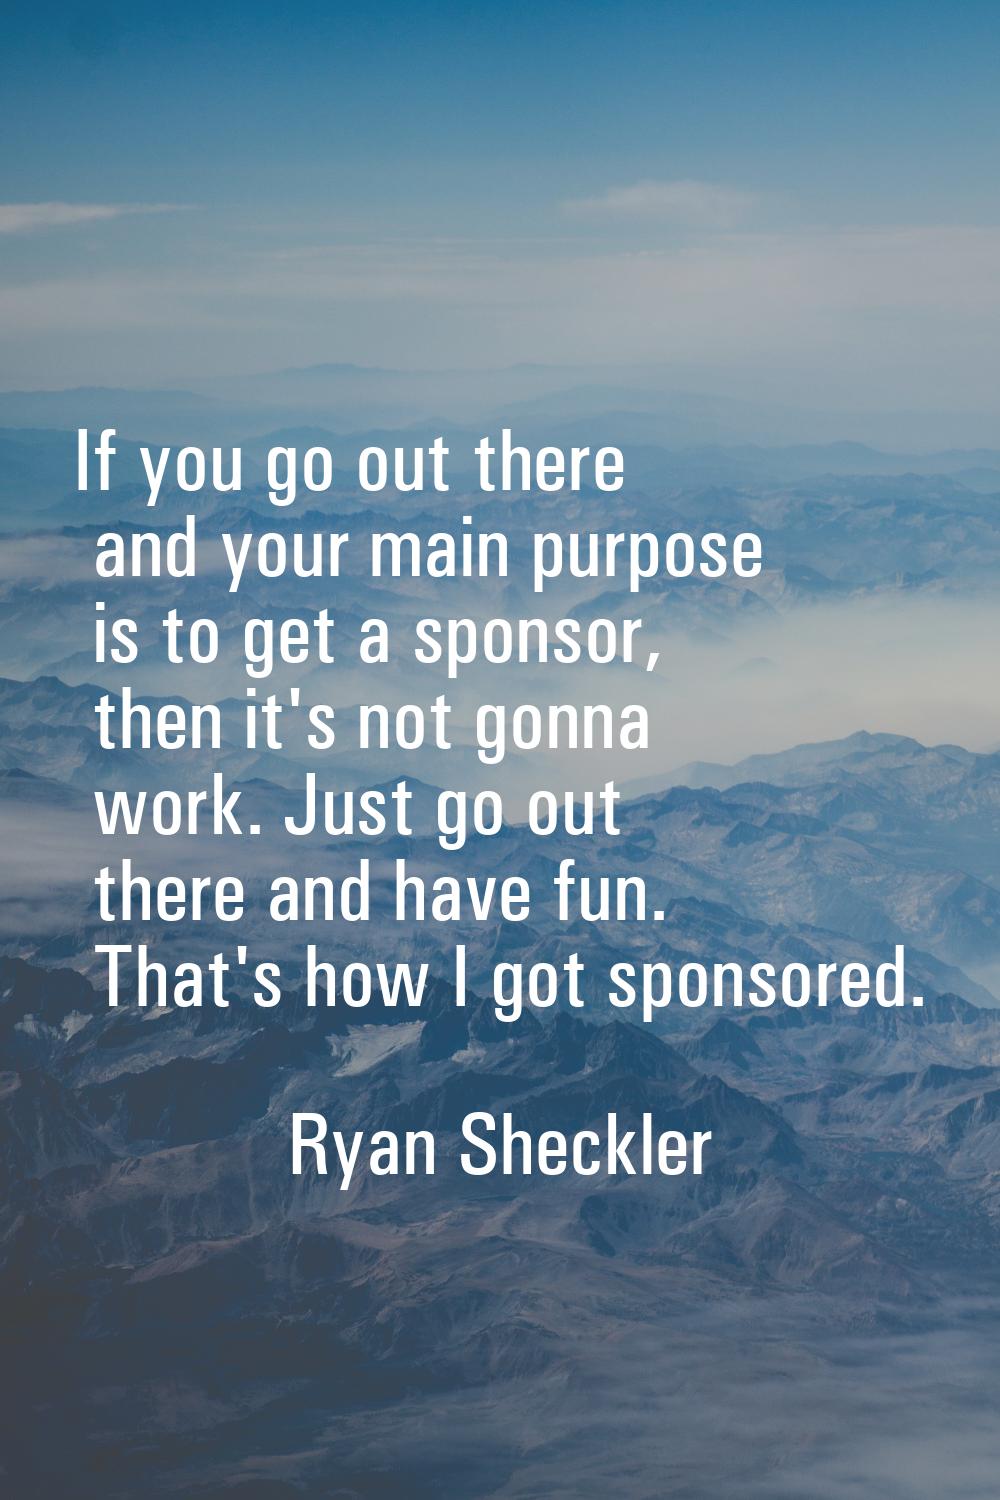 If you go out there and your main purpose is to get a sponsor, then it's not gonna work. Just go ou